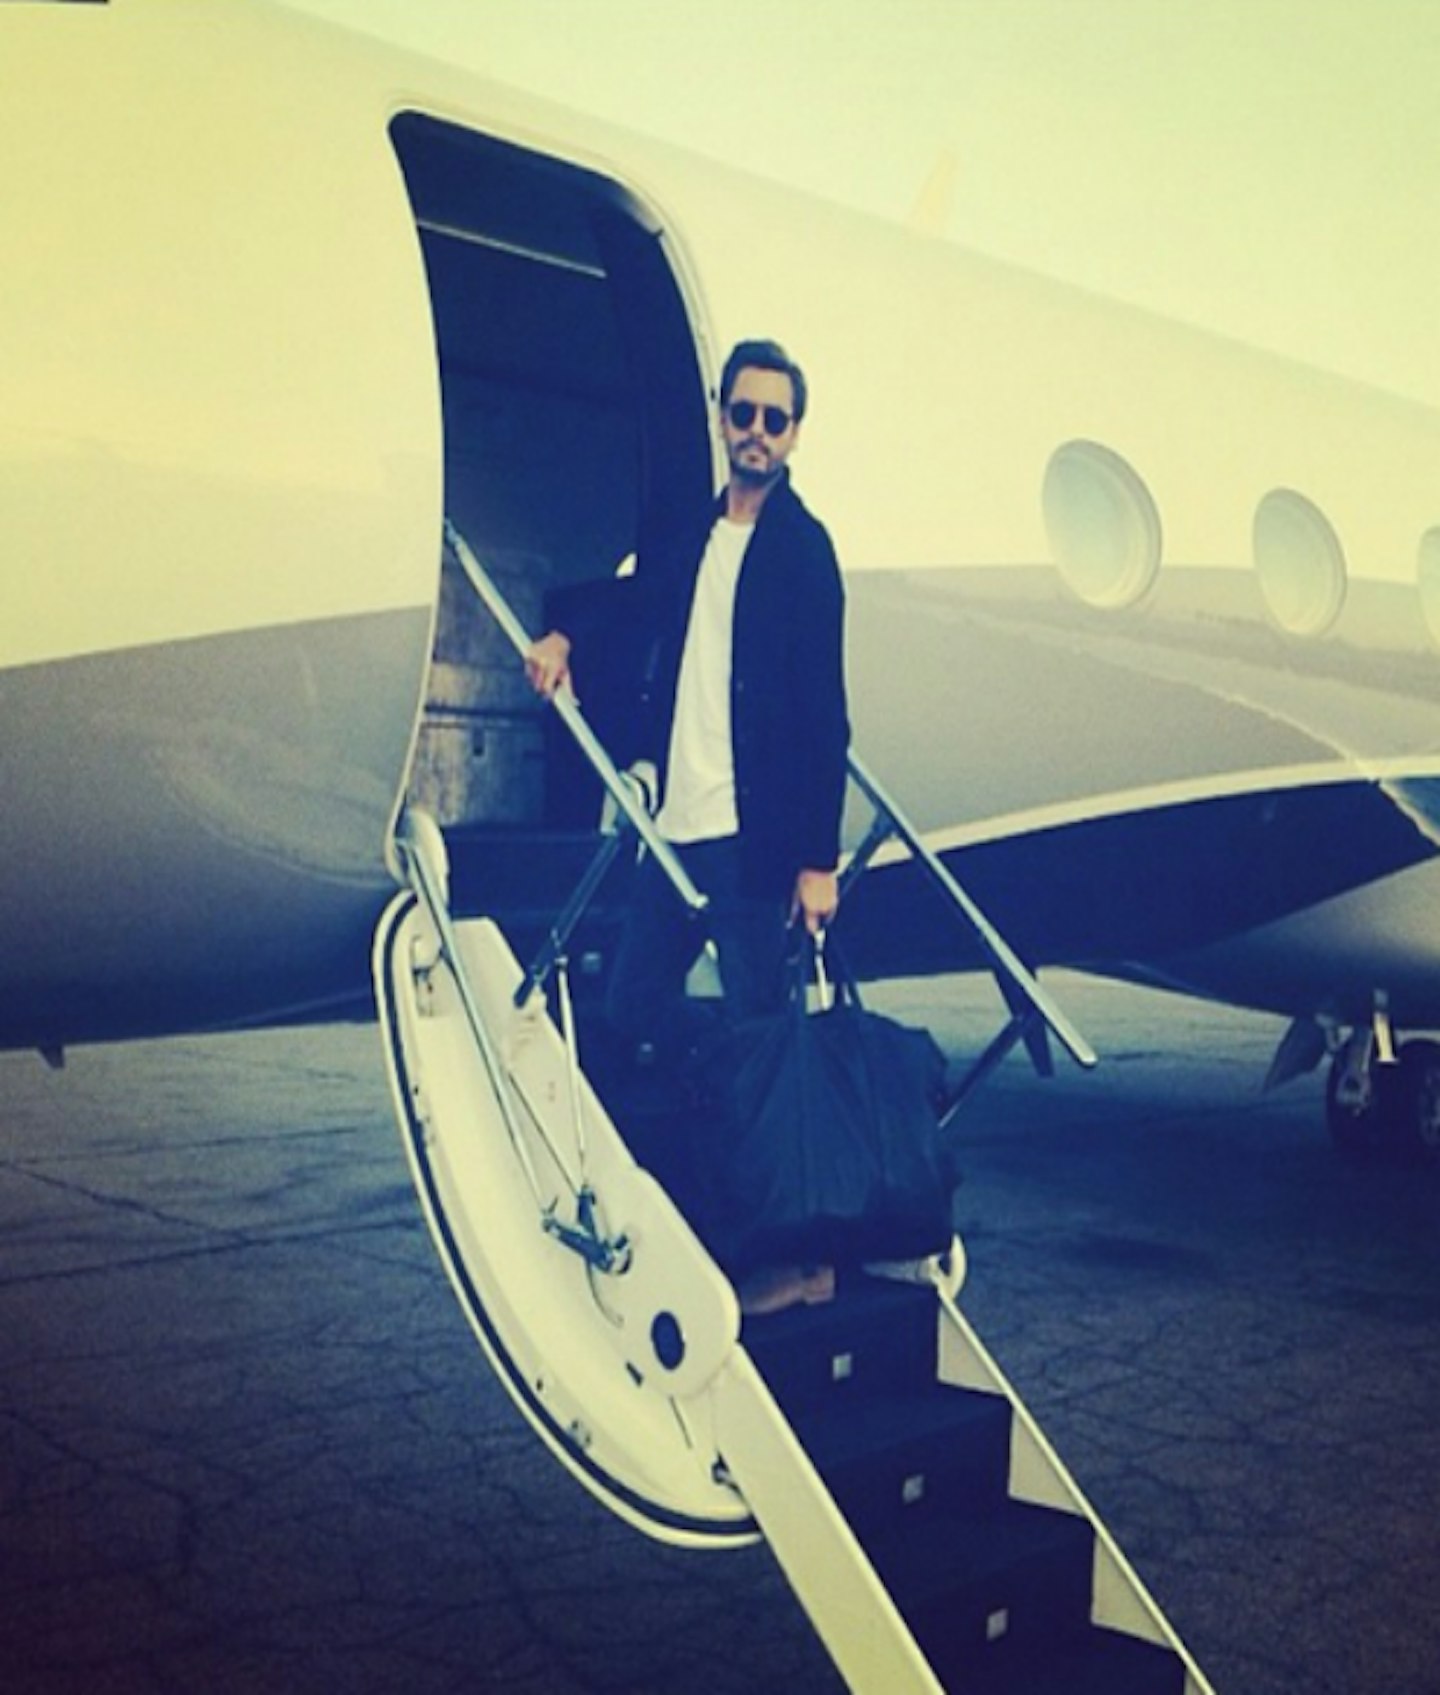 Scott captioned this Instagram snap "Private aviation is my motivation".